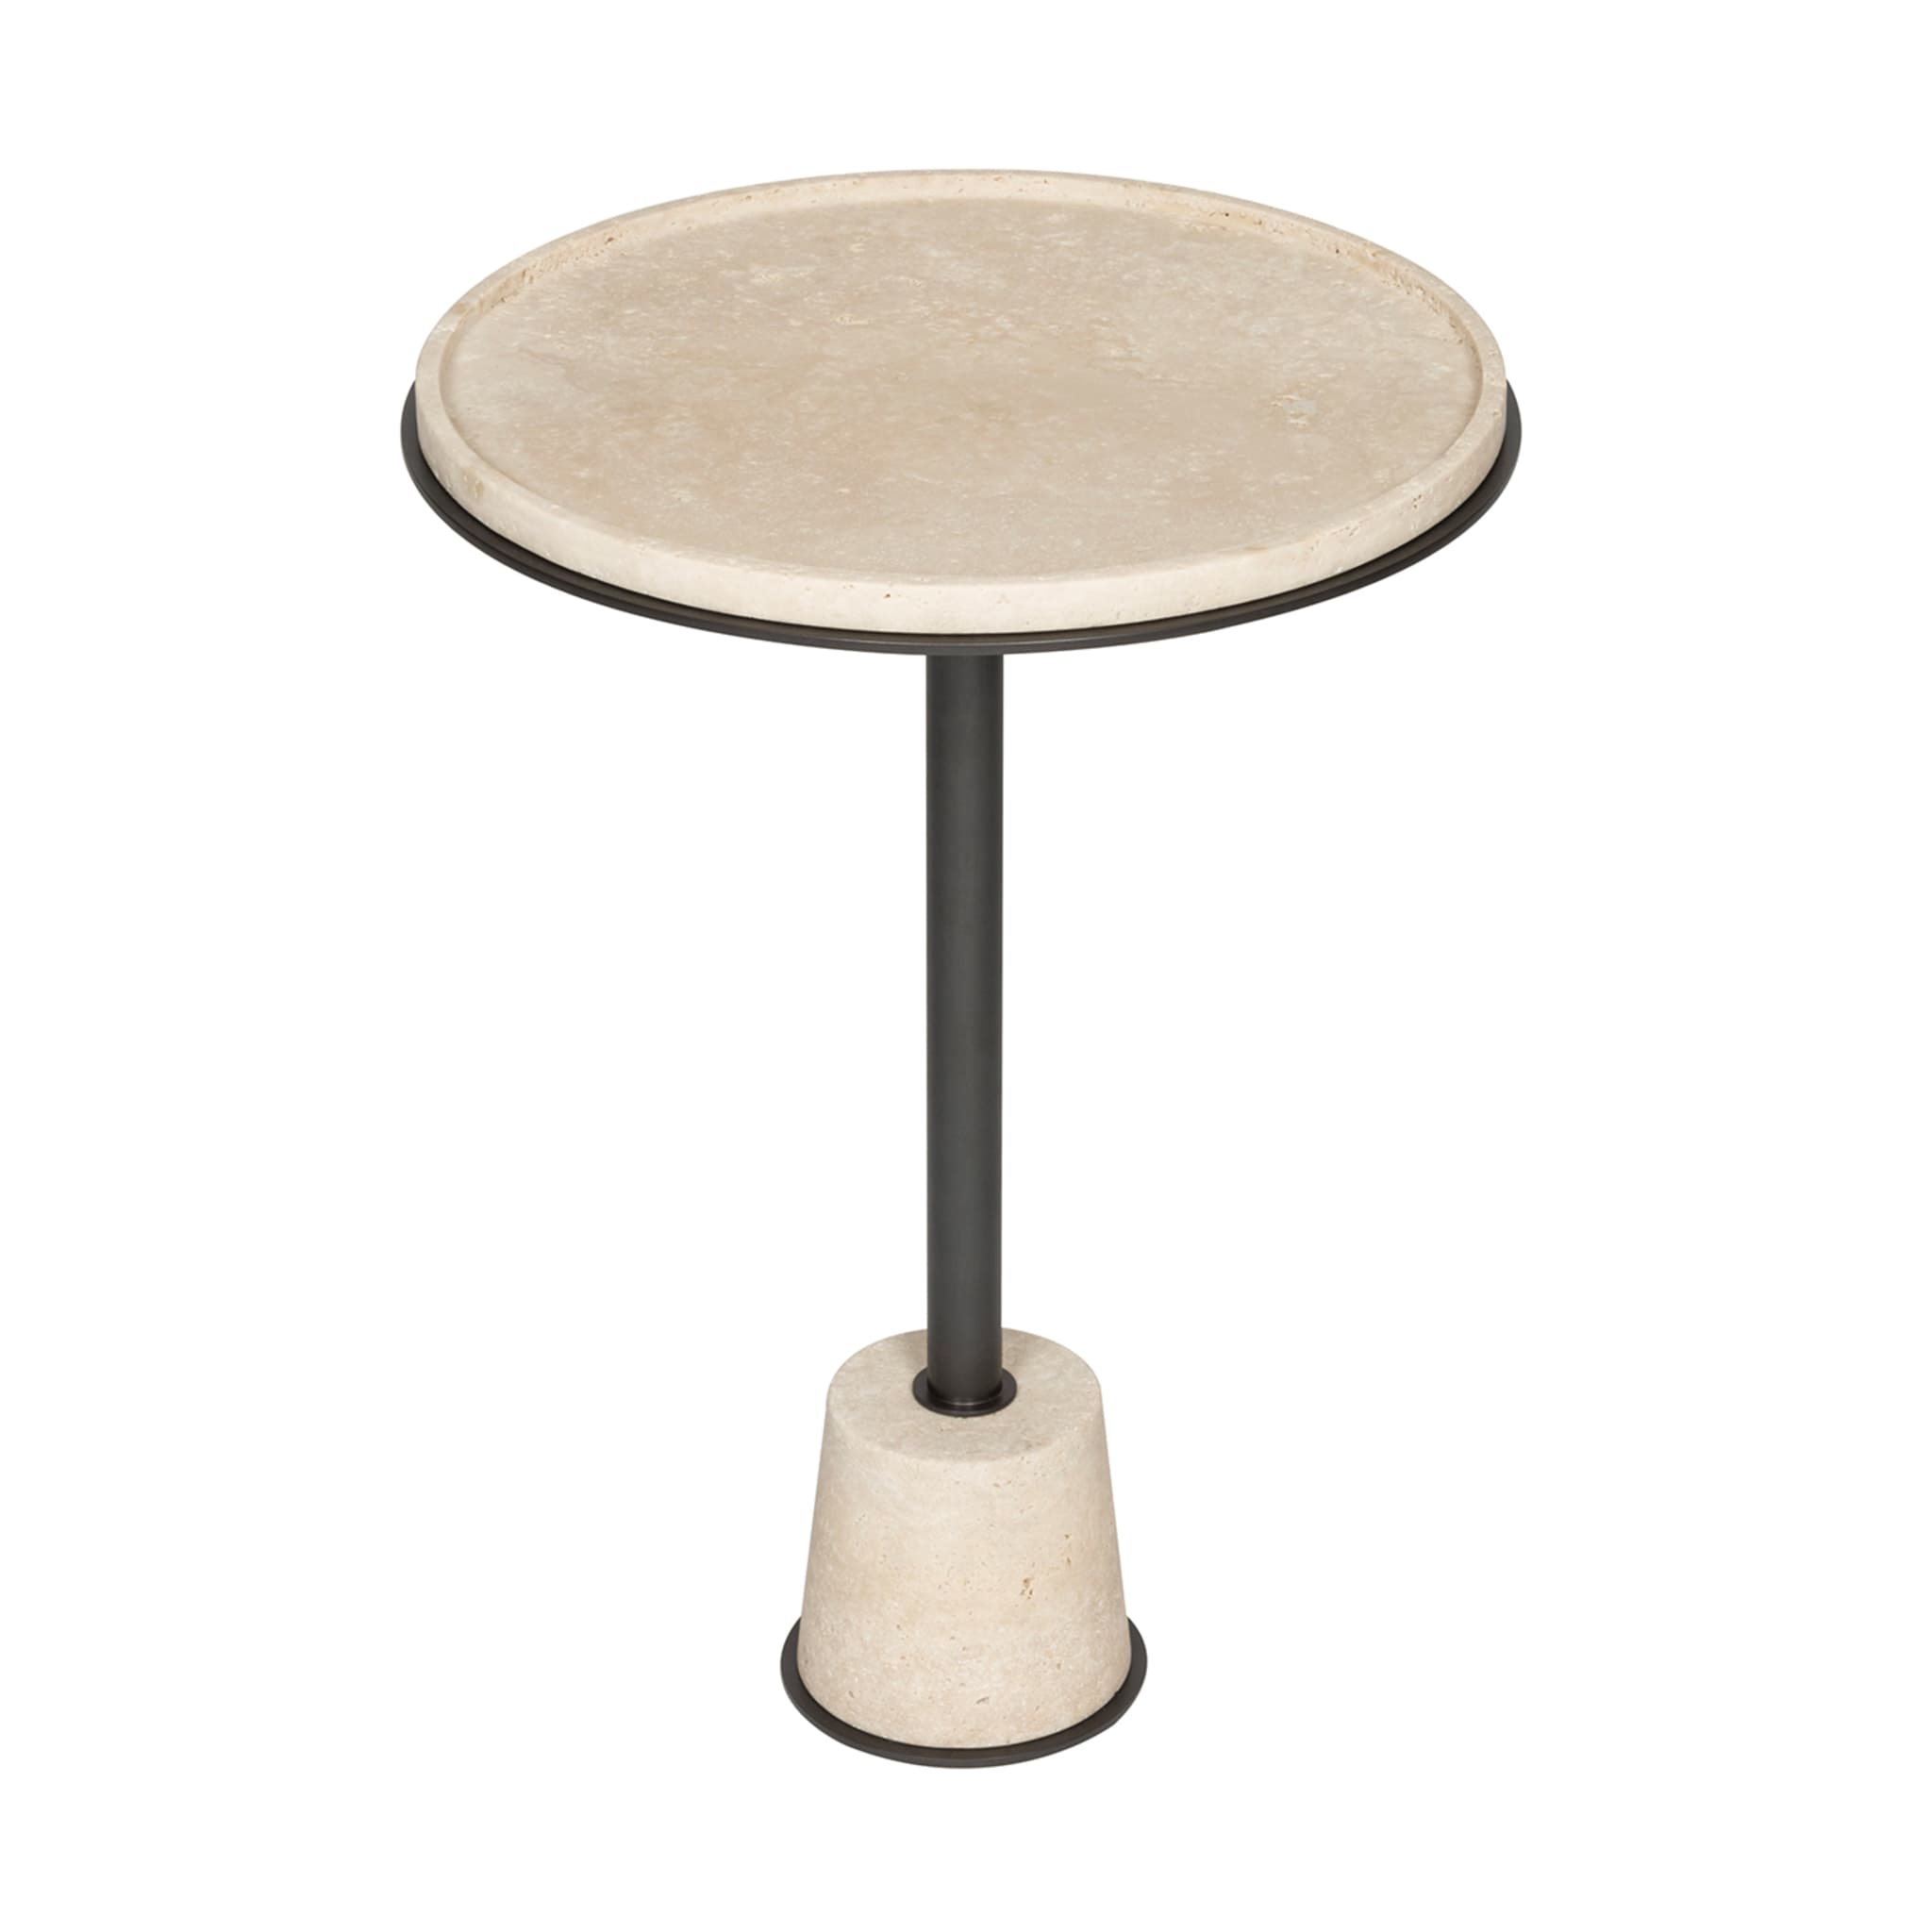 Sorrento Marble Side Tables - Marble - Alternative view 3